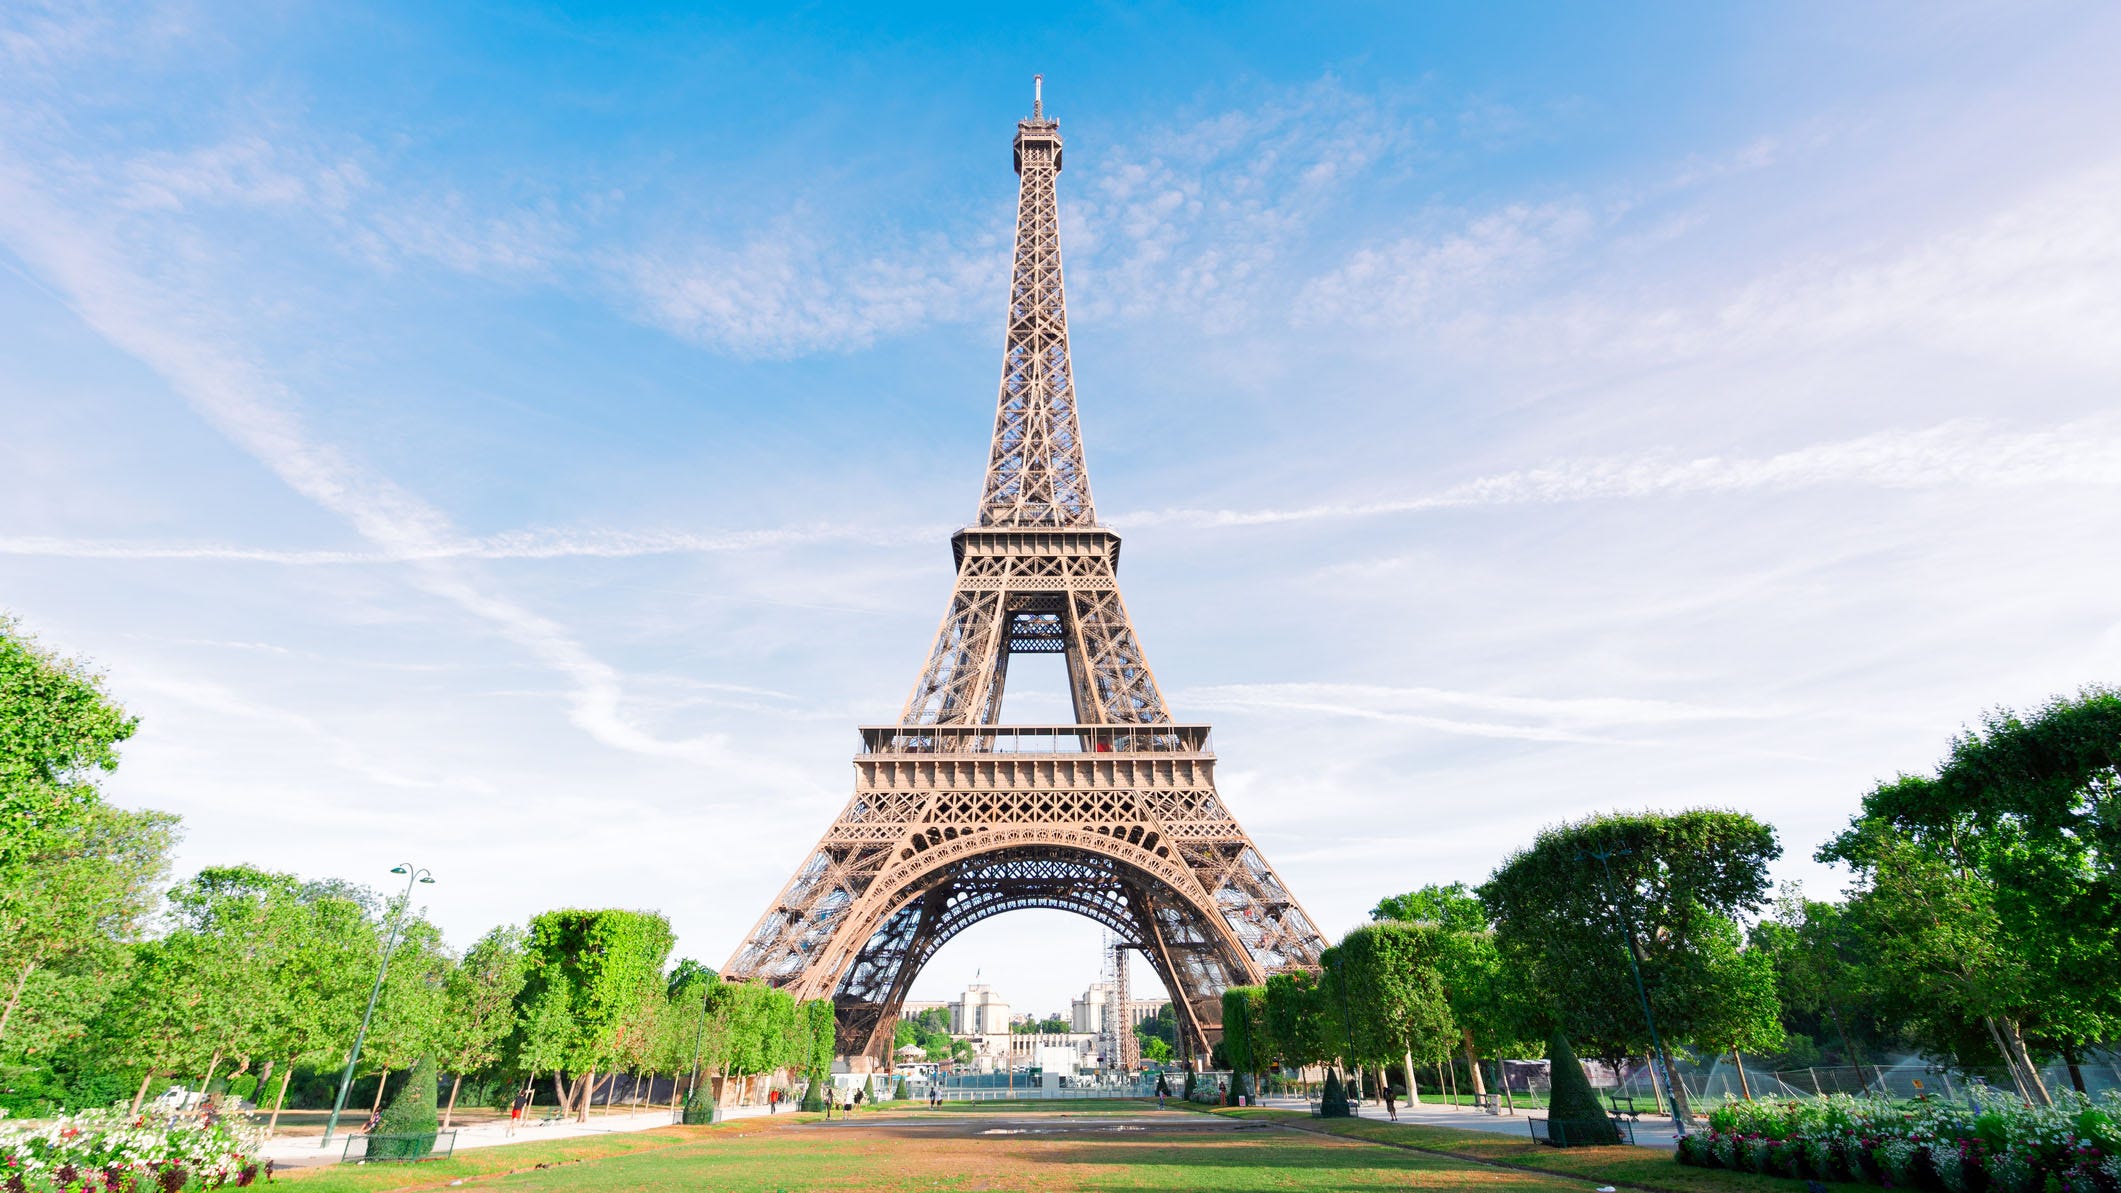 Two ‘drunk’ American tourists spend night in Eiffel Tower: report